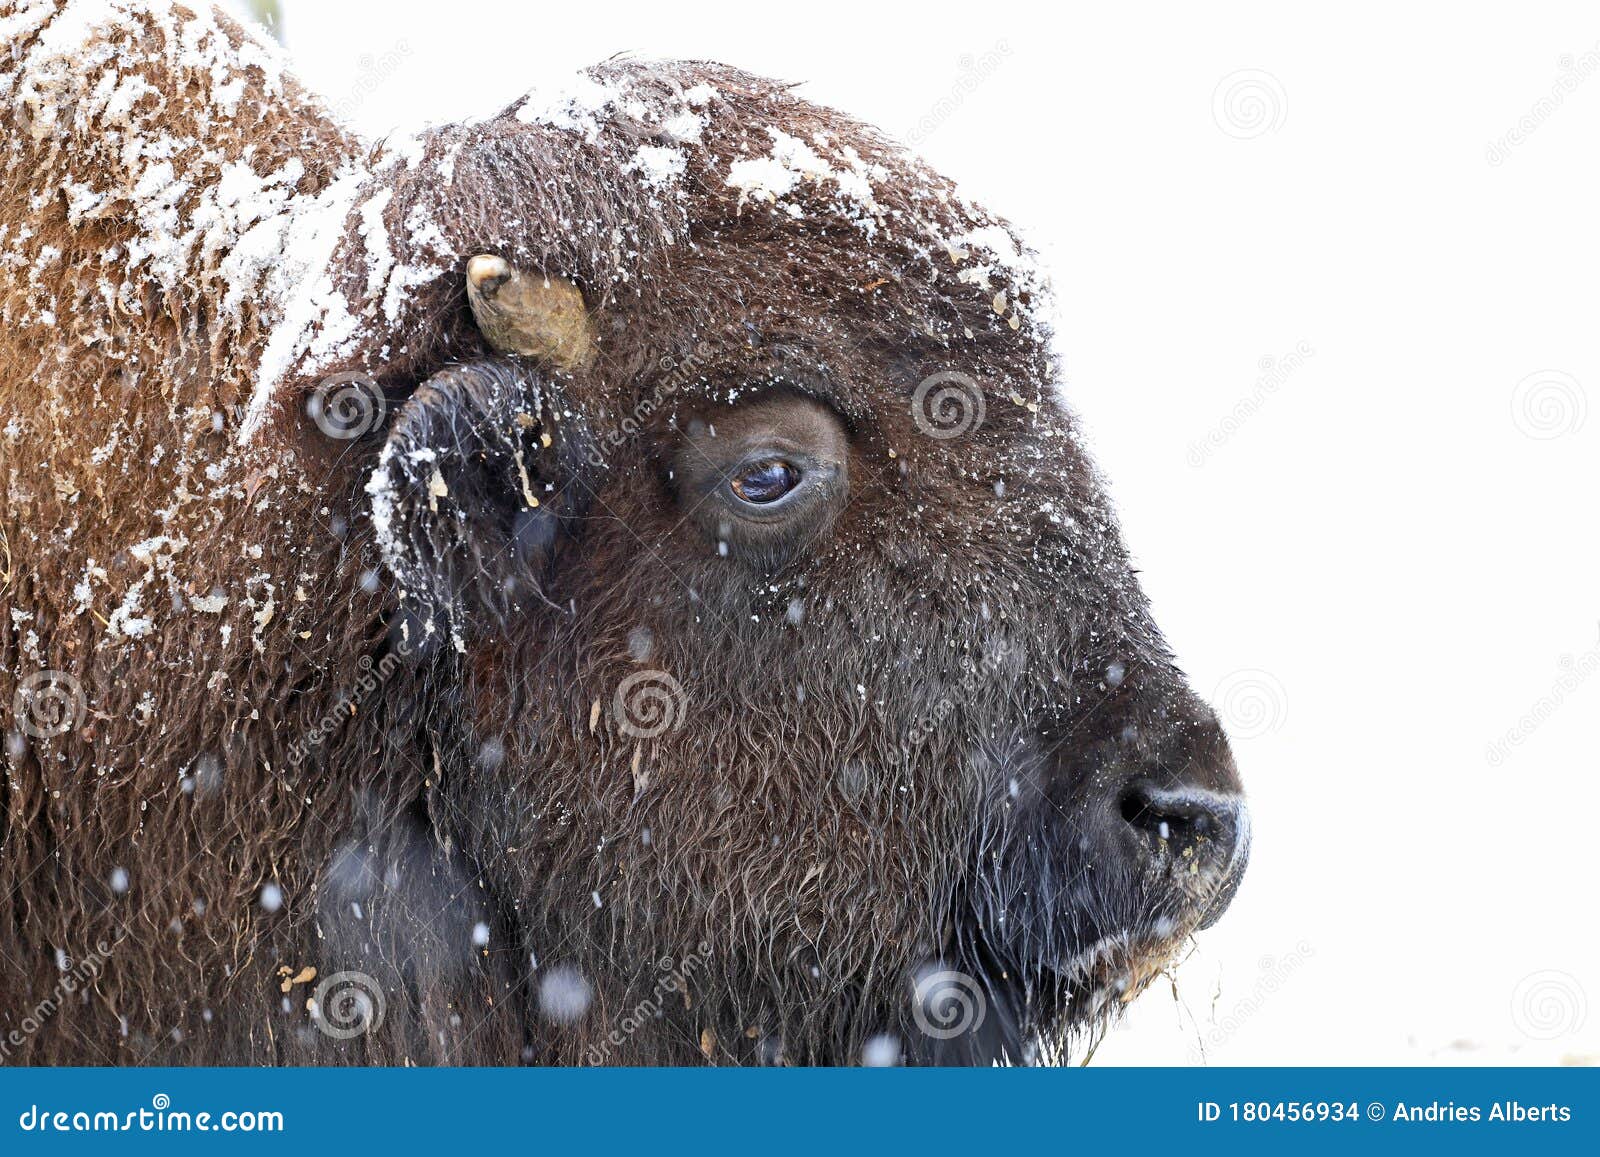 animals covered in snow